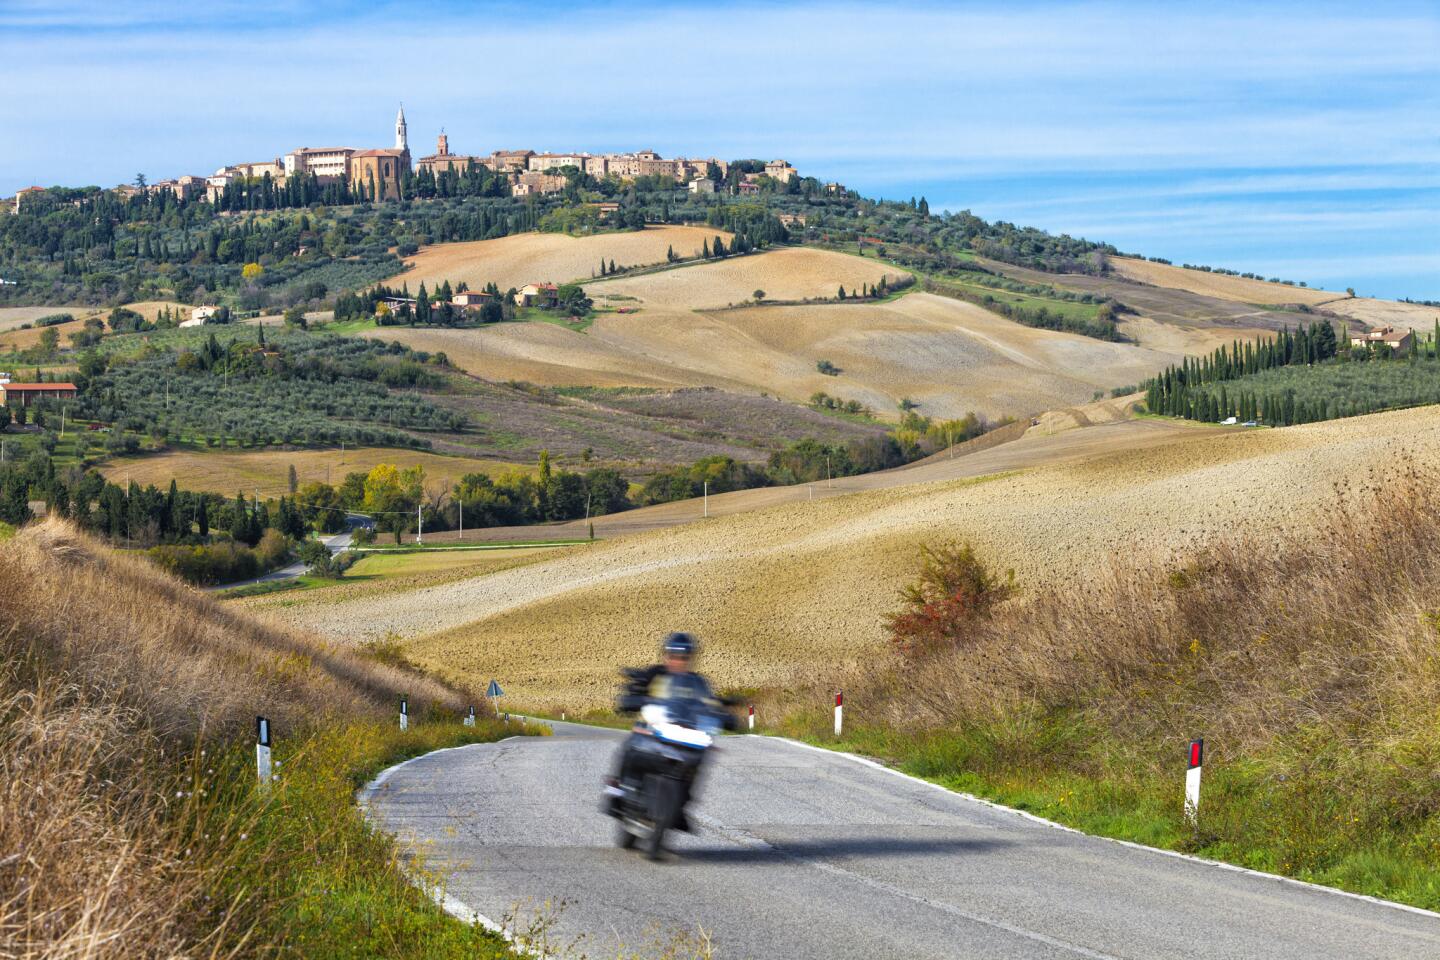 A motorcyclist navigates a winding road out of Pienza in Tuscany, Italy.